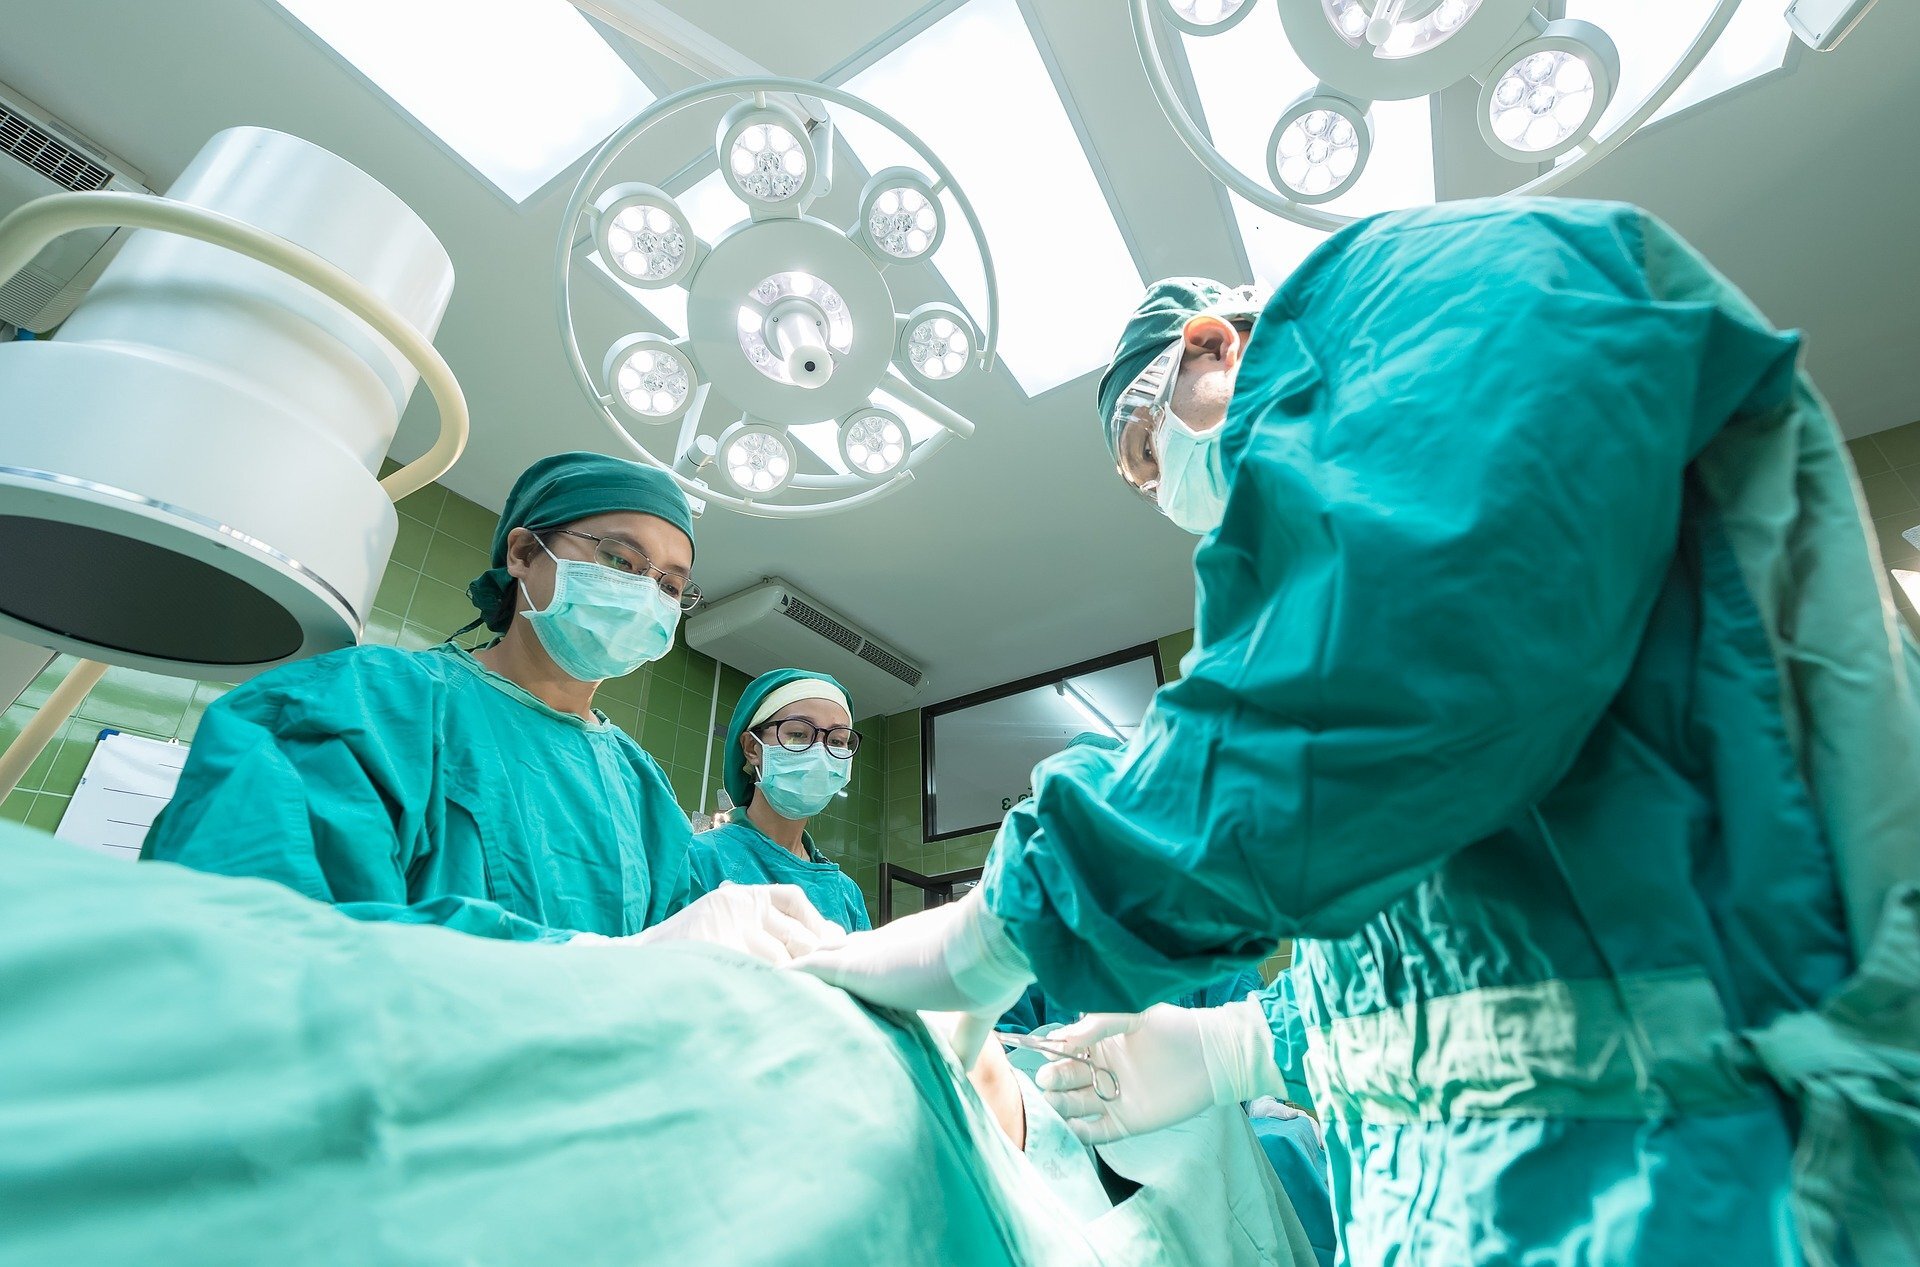 Excess oxygen during surgery linked to higher risk of organ damage